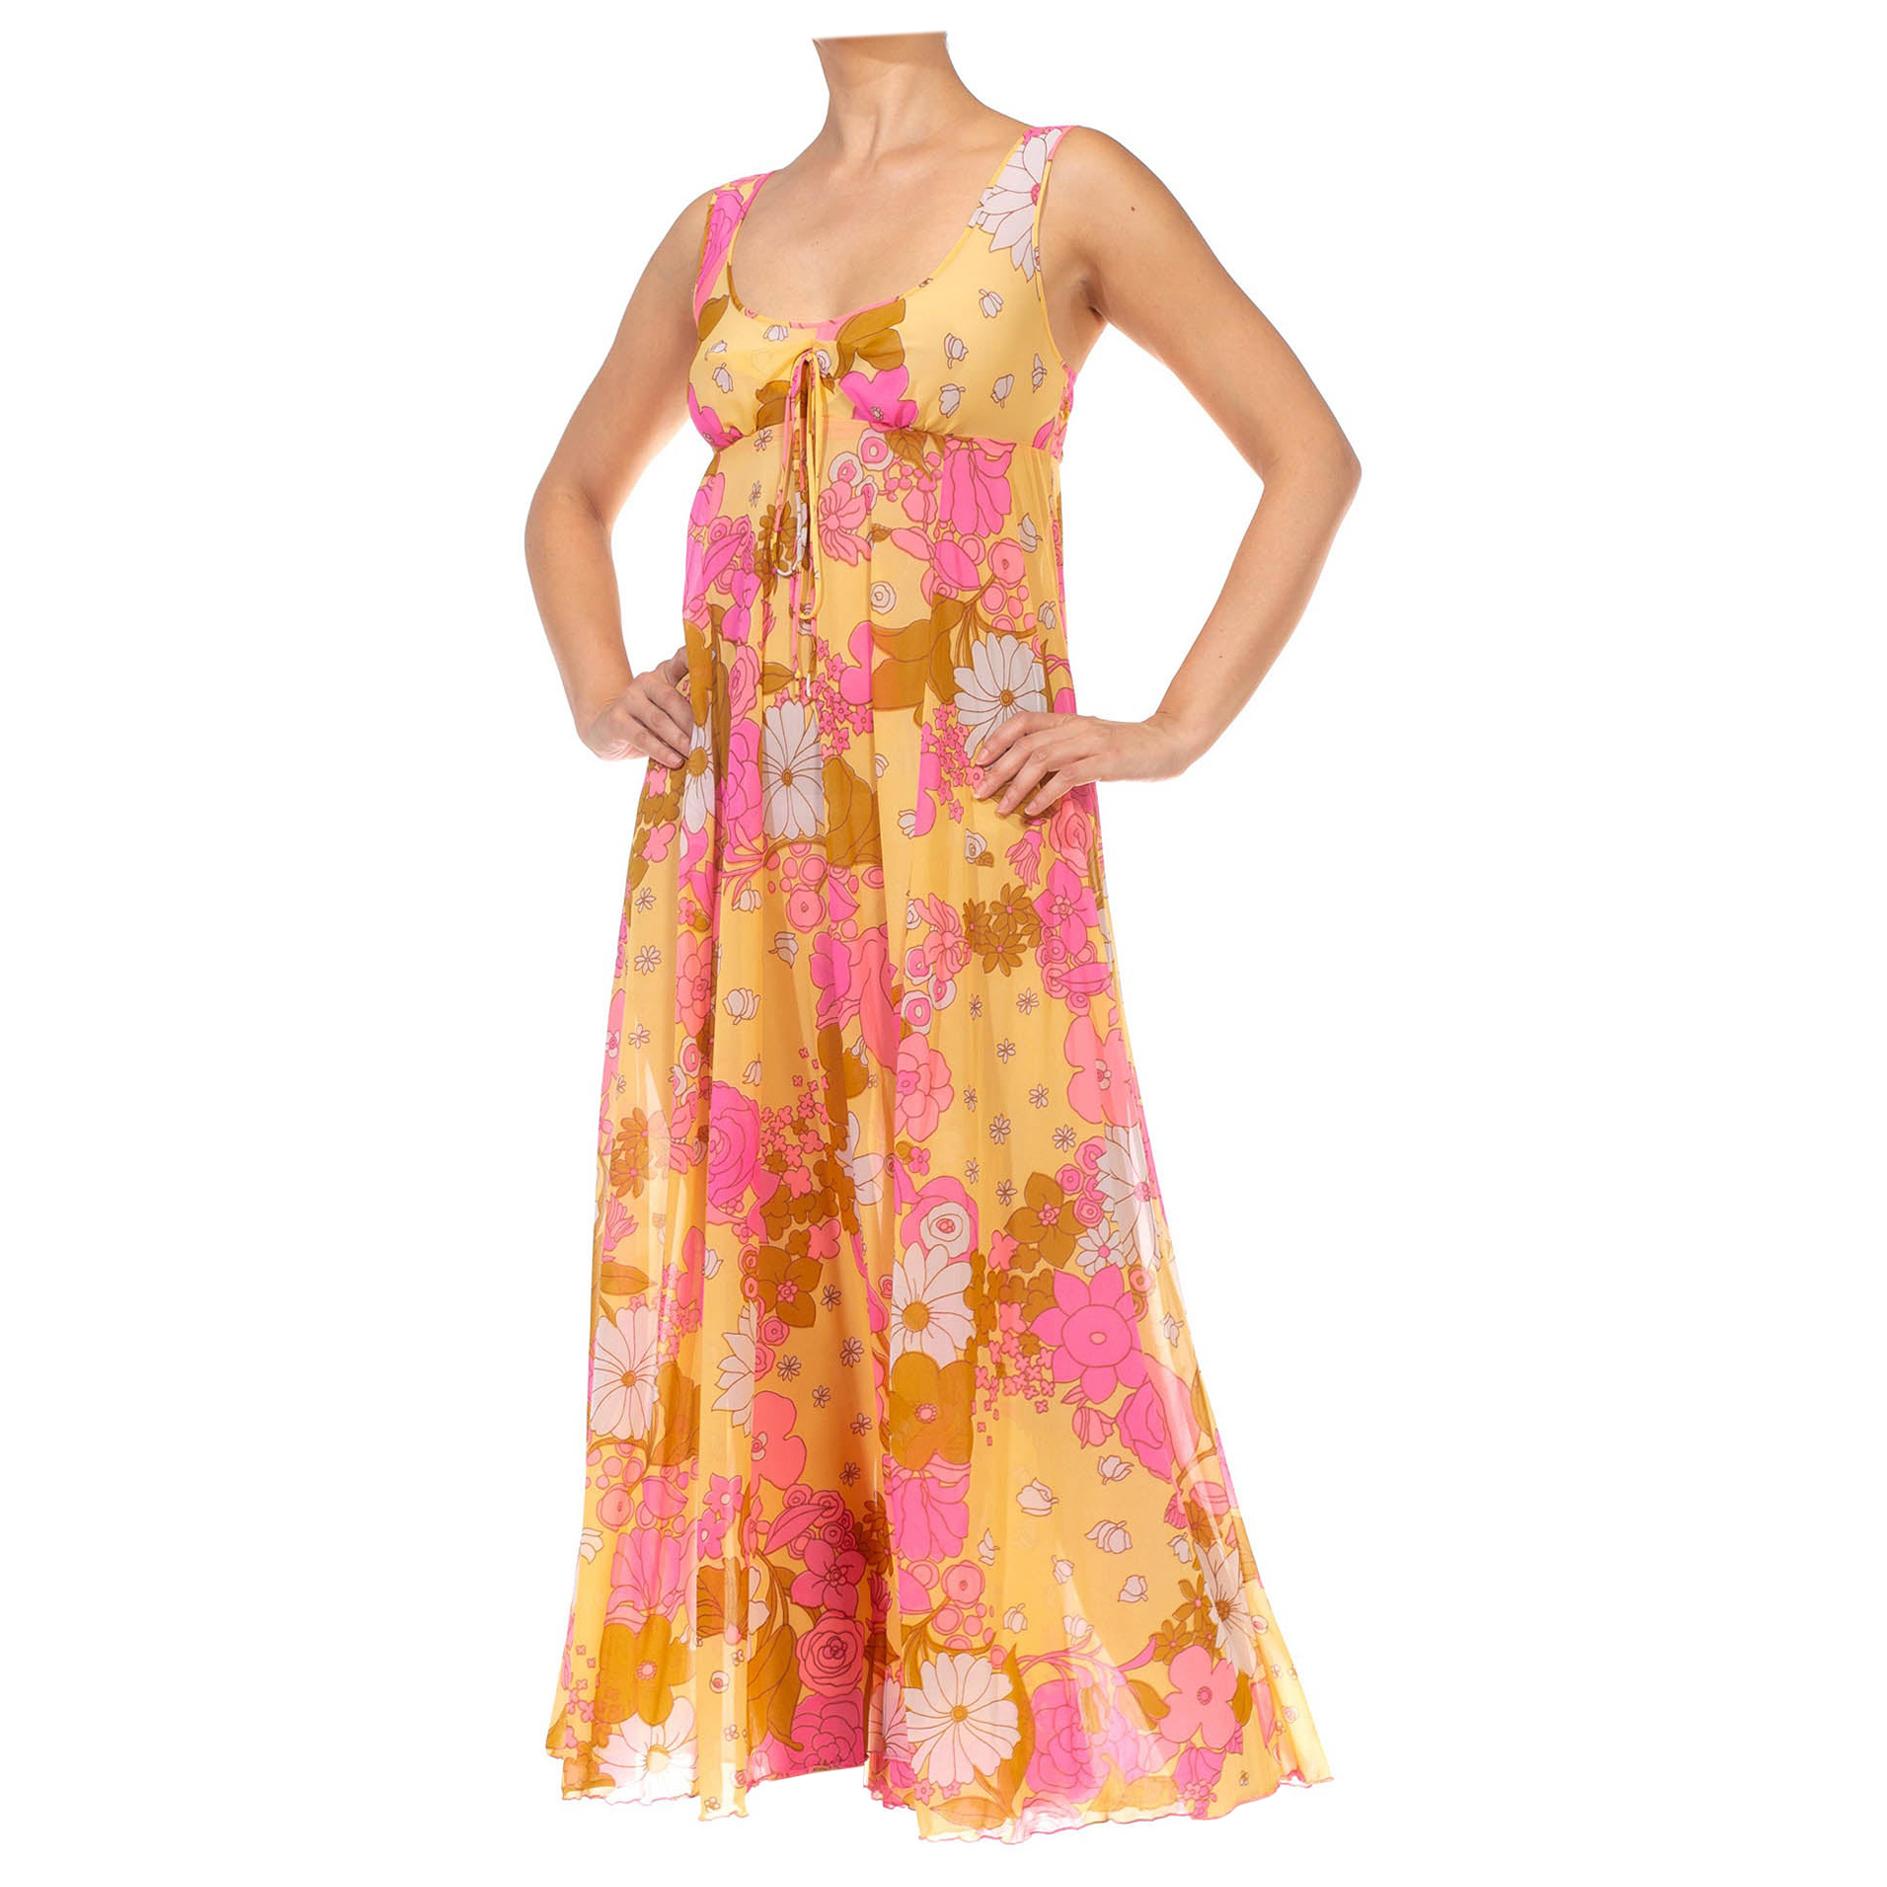 1970S Pink & Yellow Nylon Tricot Jersey Floral Print Empire Waist Negligee Dress